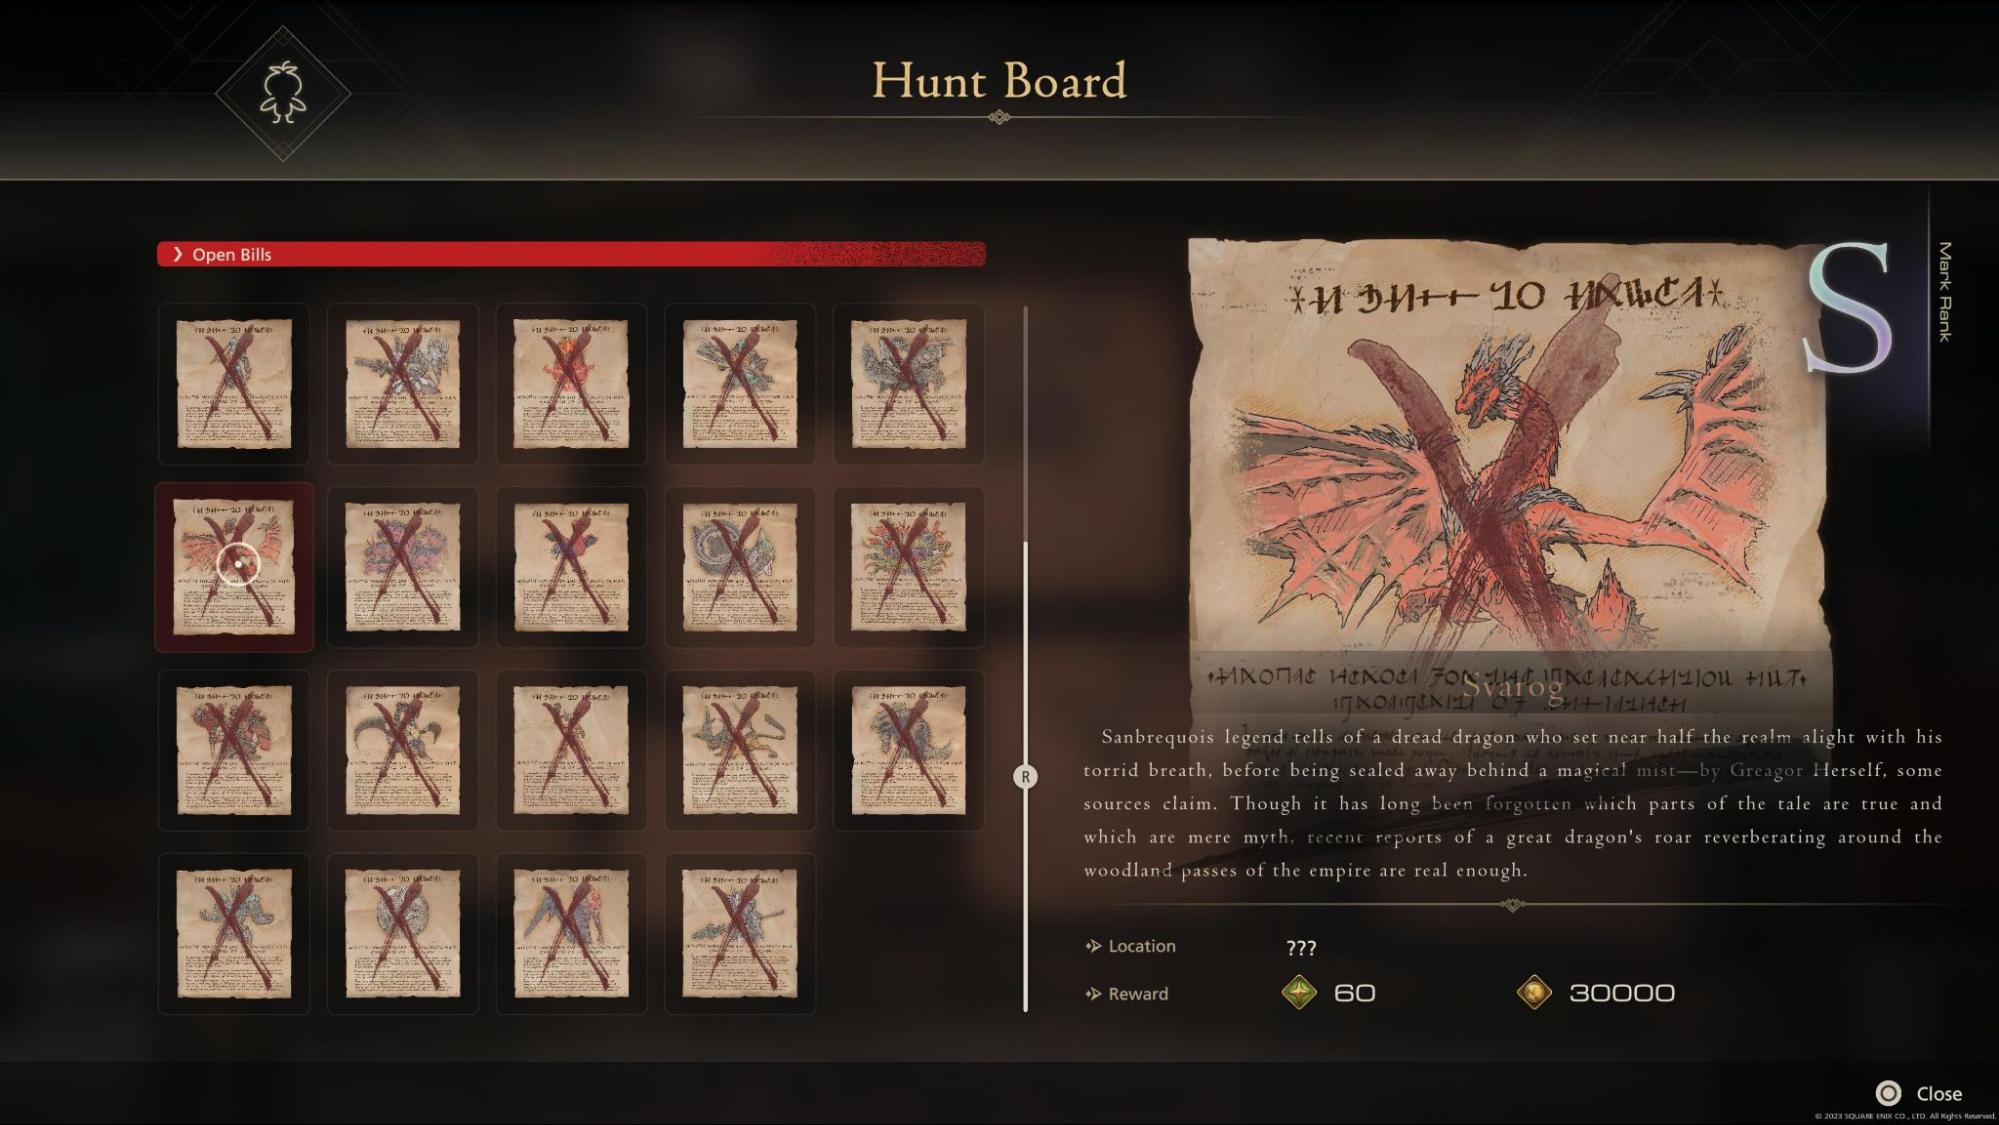 There are 32 Hunt Board requests in total.